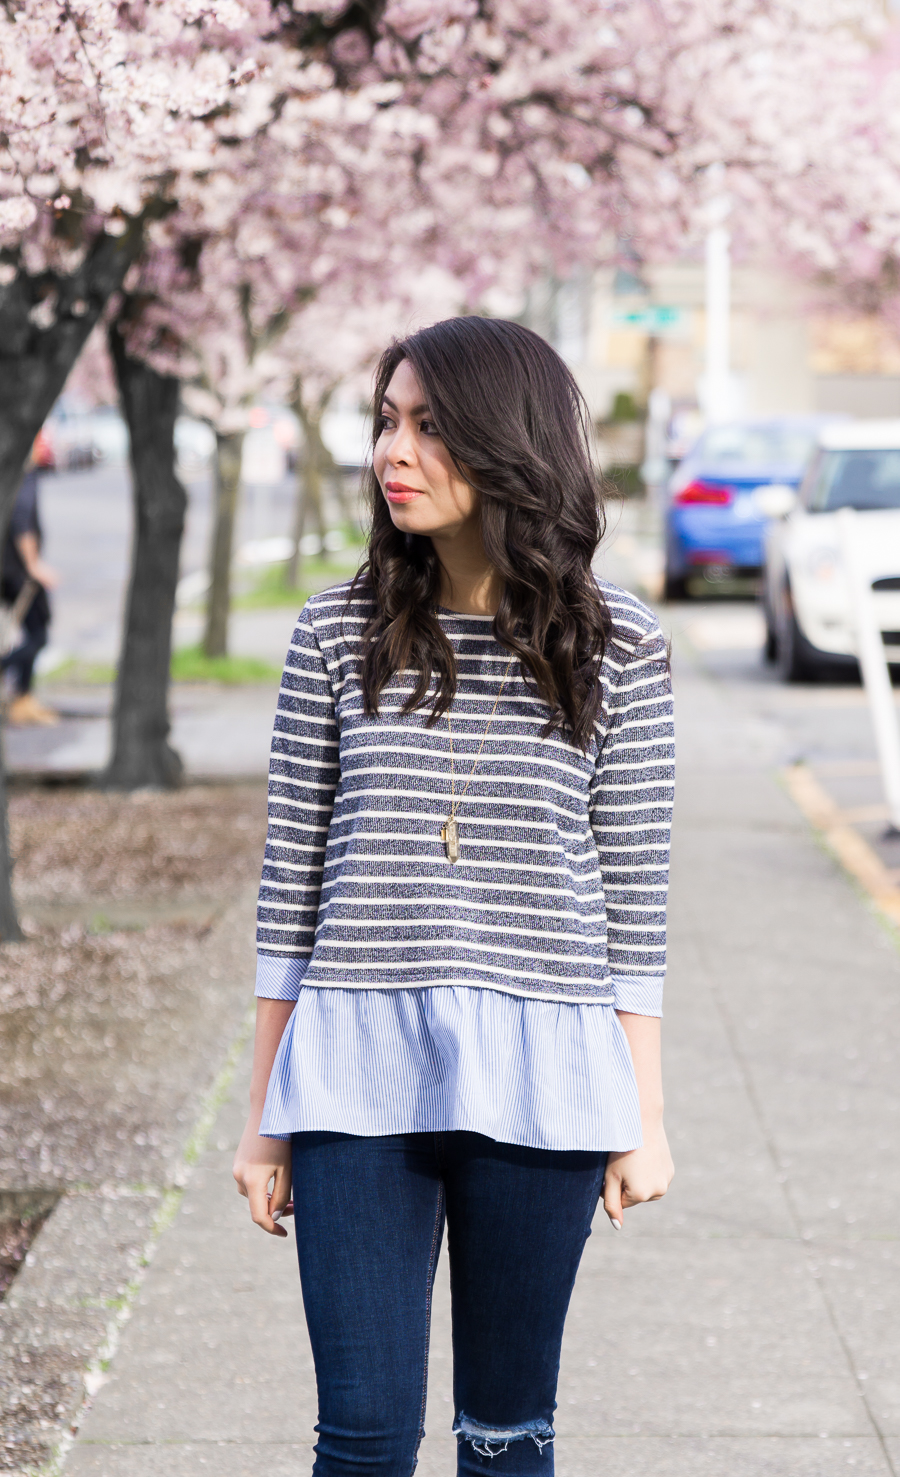 A Menswear Inspired Outfit ft. Striped Sweater + Pleated Trousers - Jeans  and a Teacup